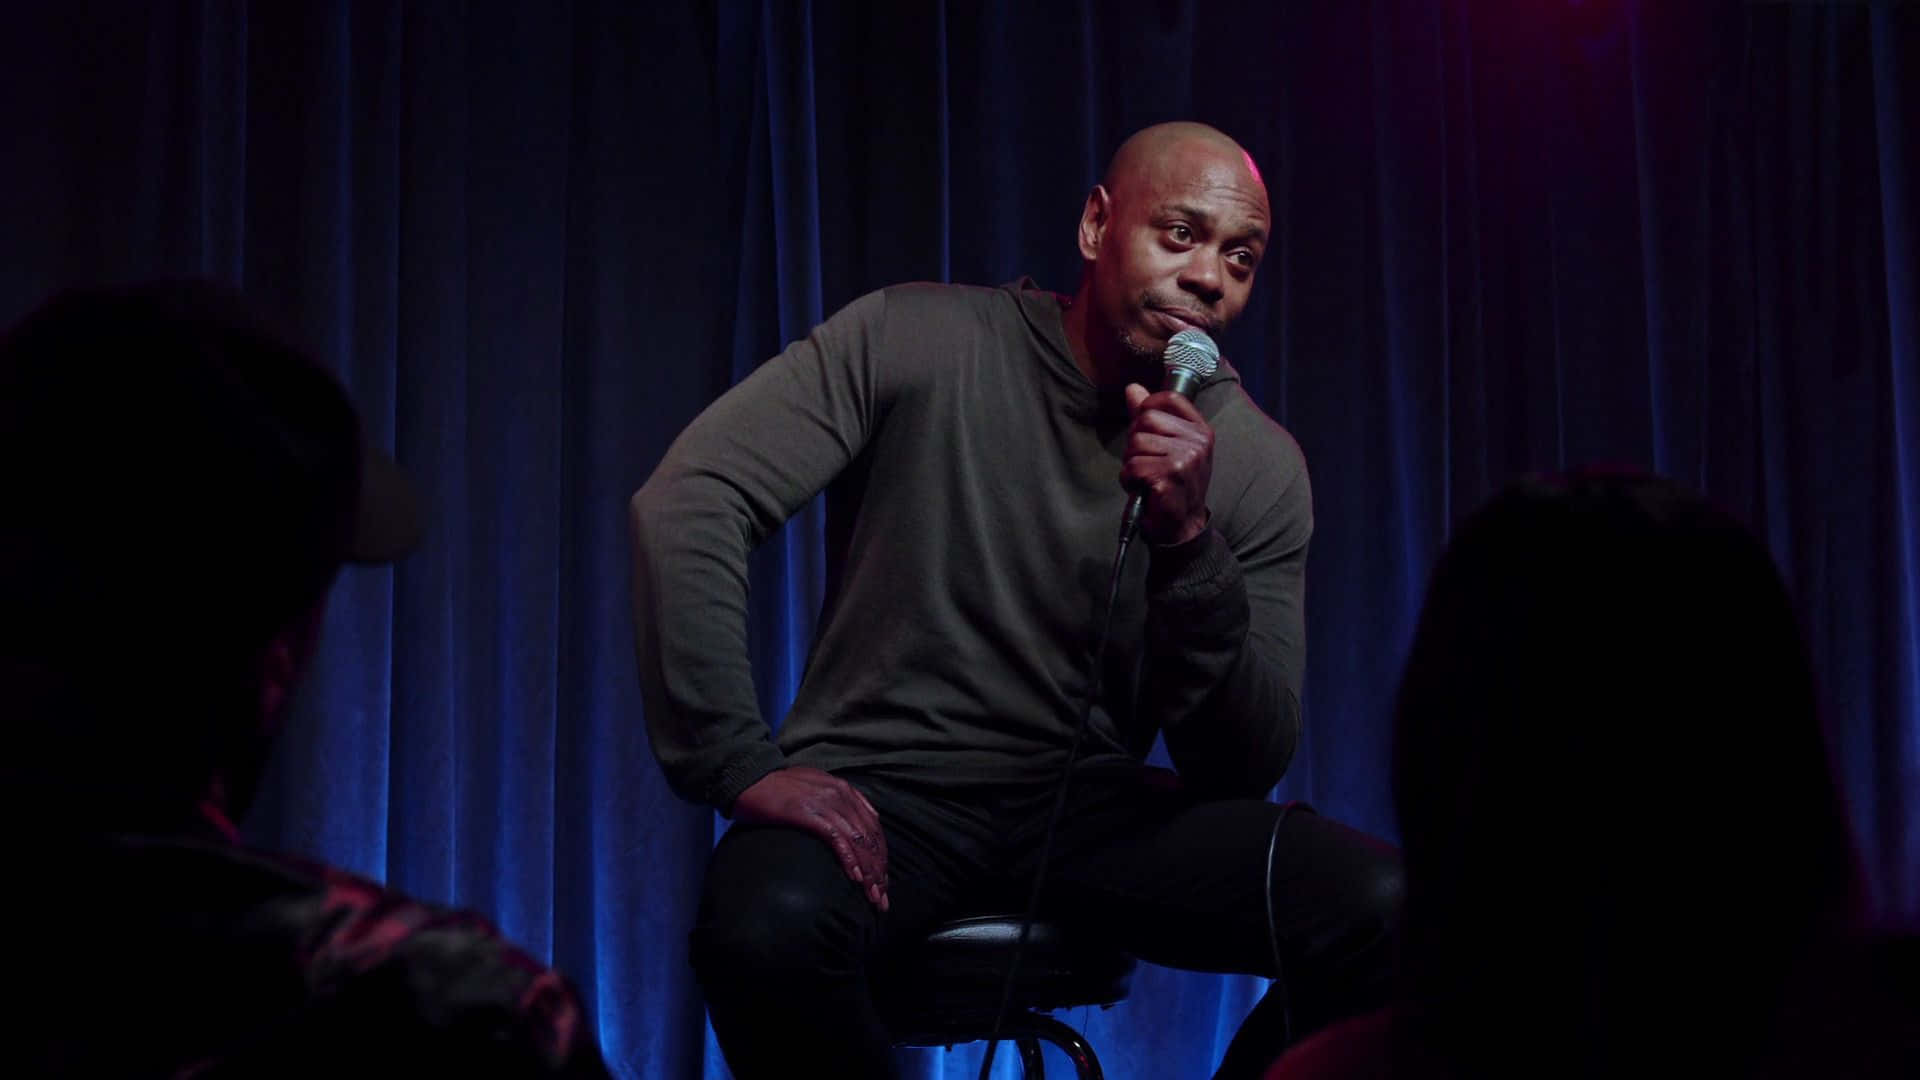 Dave Chappelle On Stage Delivering A Powerful Performance Wallpaper